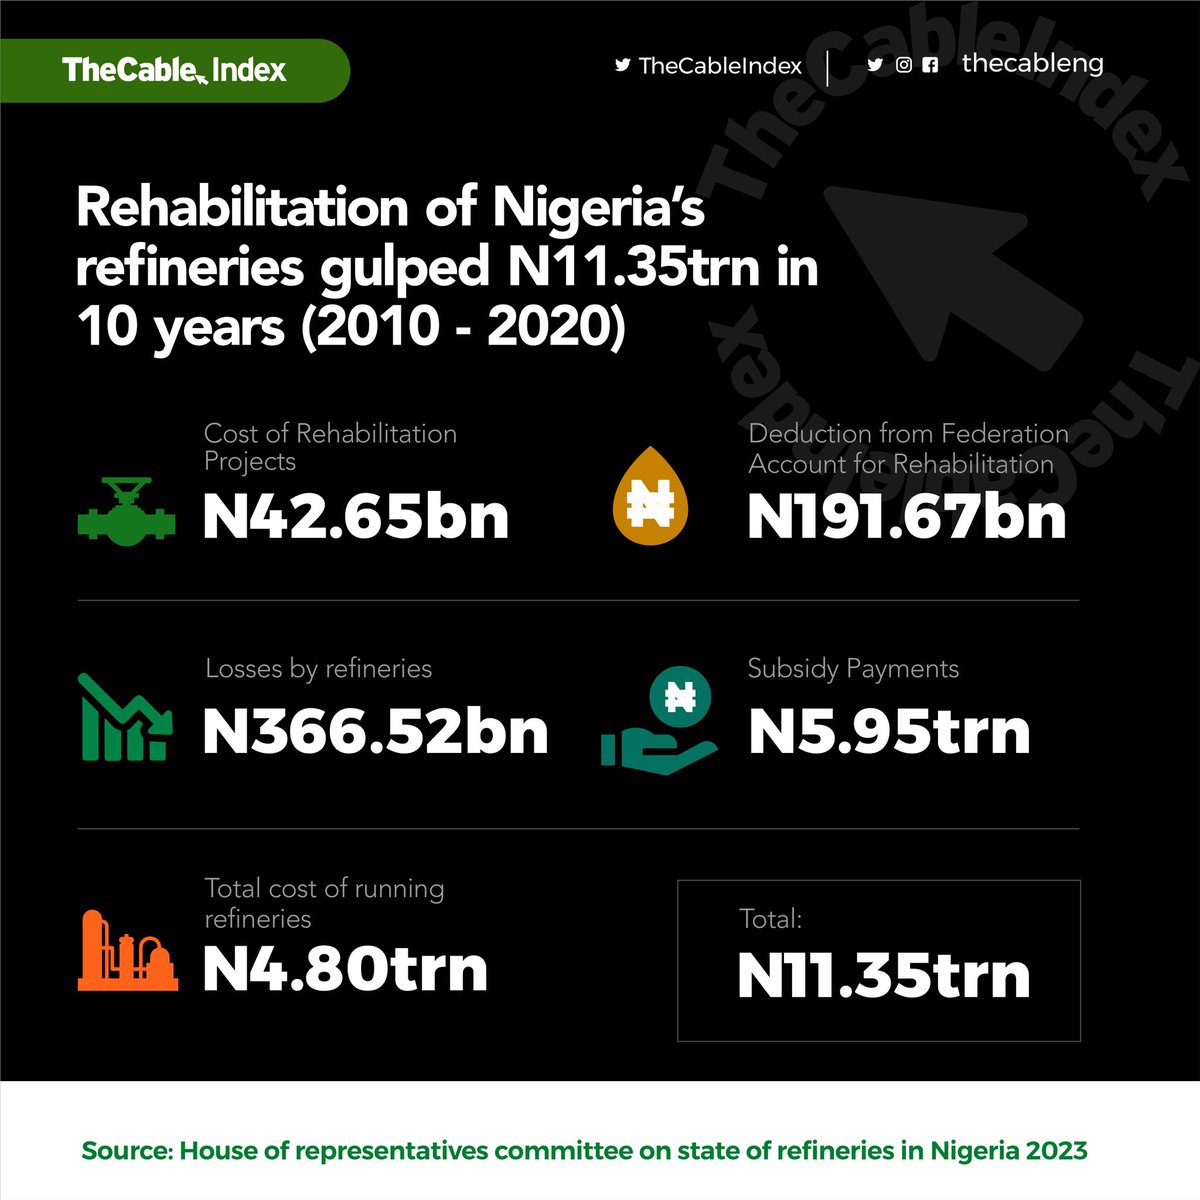 Rehabilitation of Nigeria’s refineries gulped N11.35trn in 10 years (2010 - 2020) #TheCableIndex